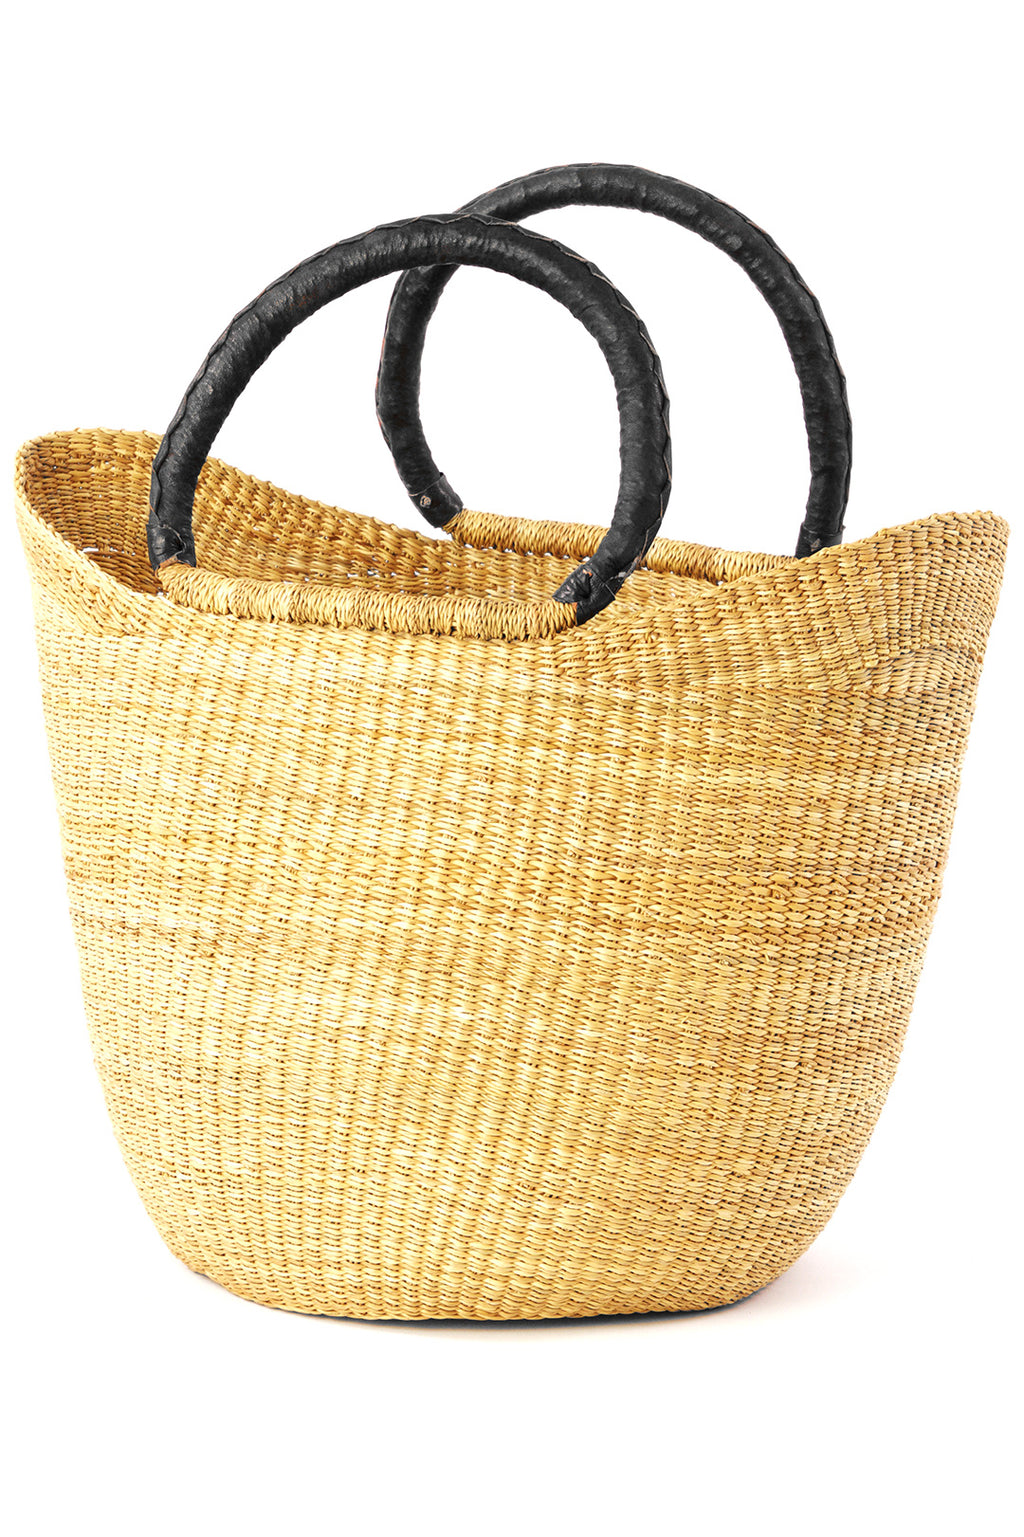 Natural Ghanaian Wing Shopper with Black Leather Handles Black Handles with Black Braid